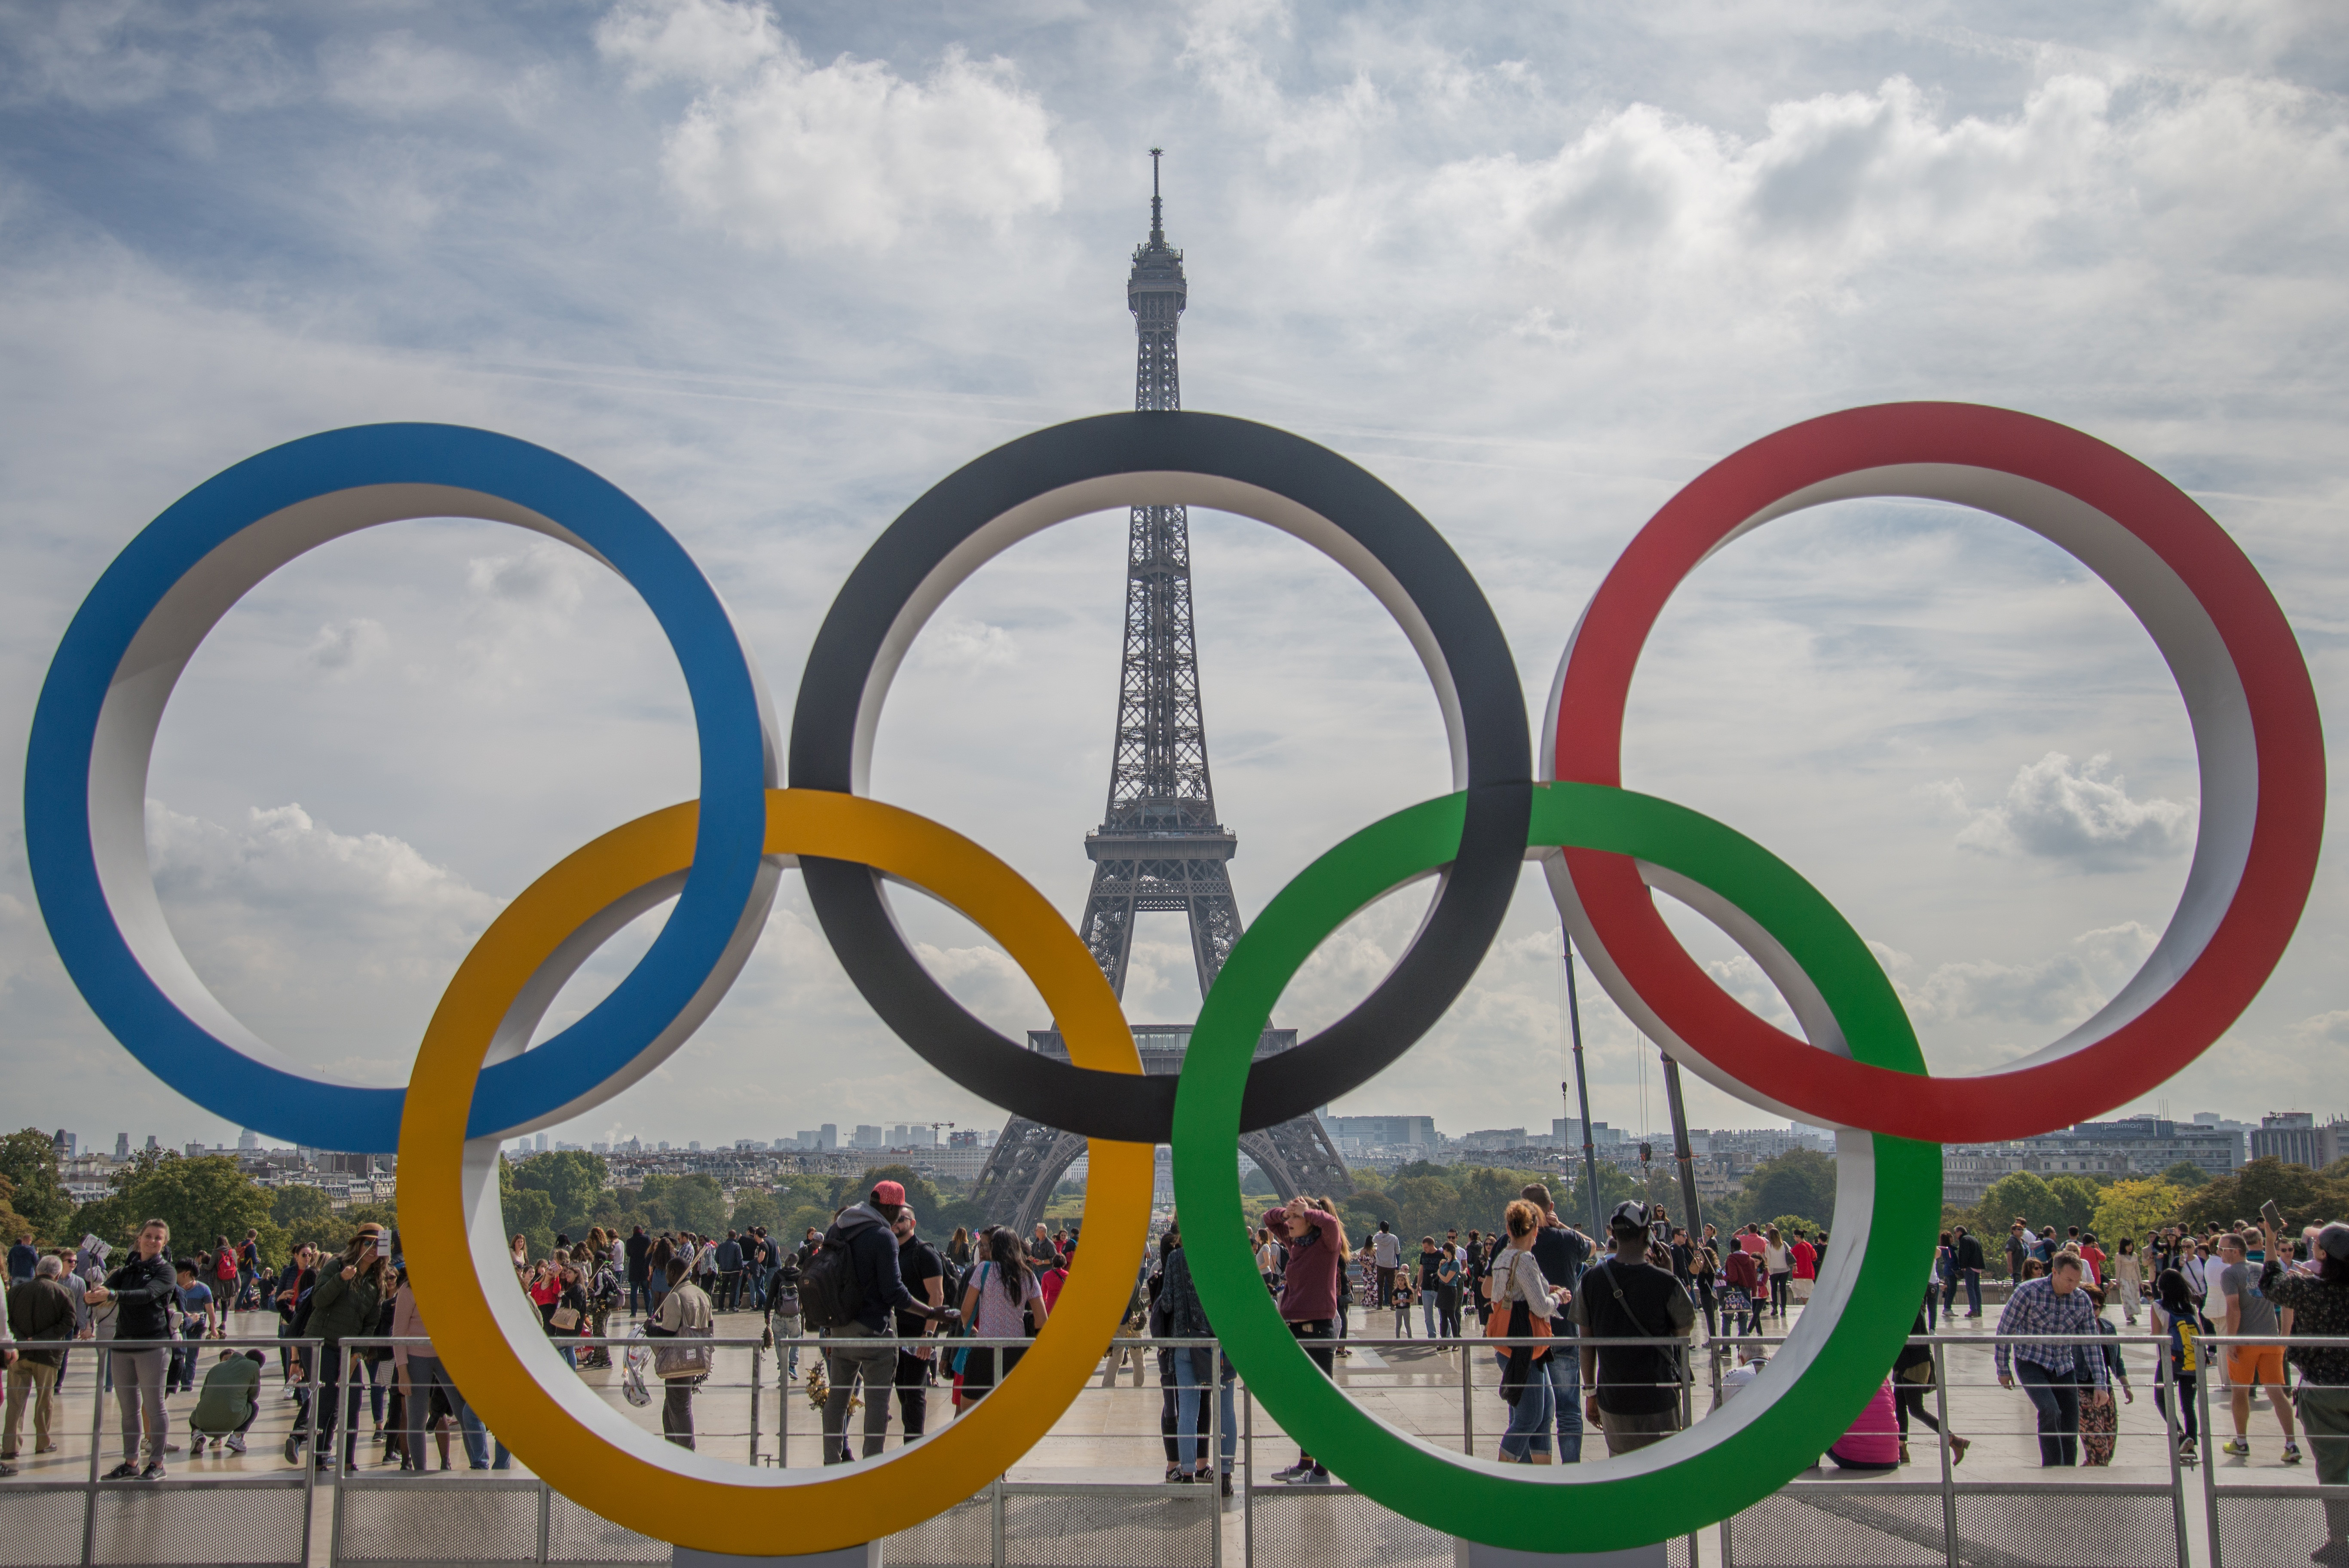 Olympic Rings around the Eiffel Tower image Free stock photo Public